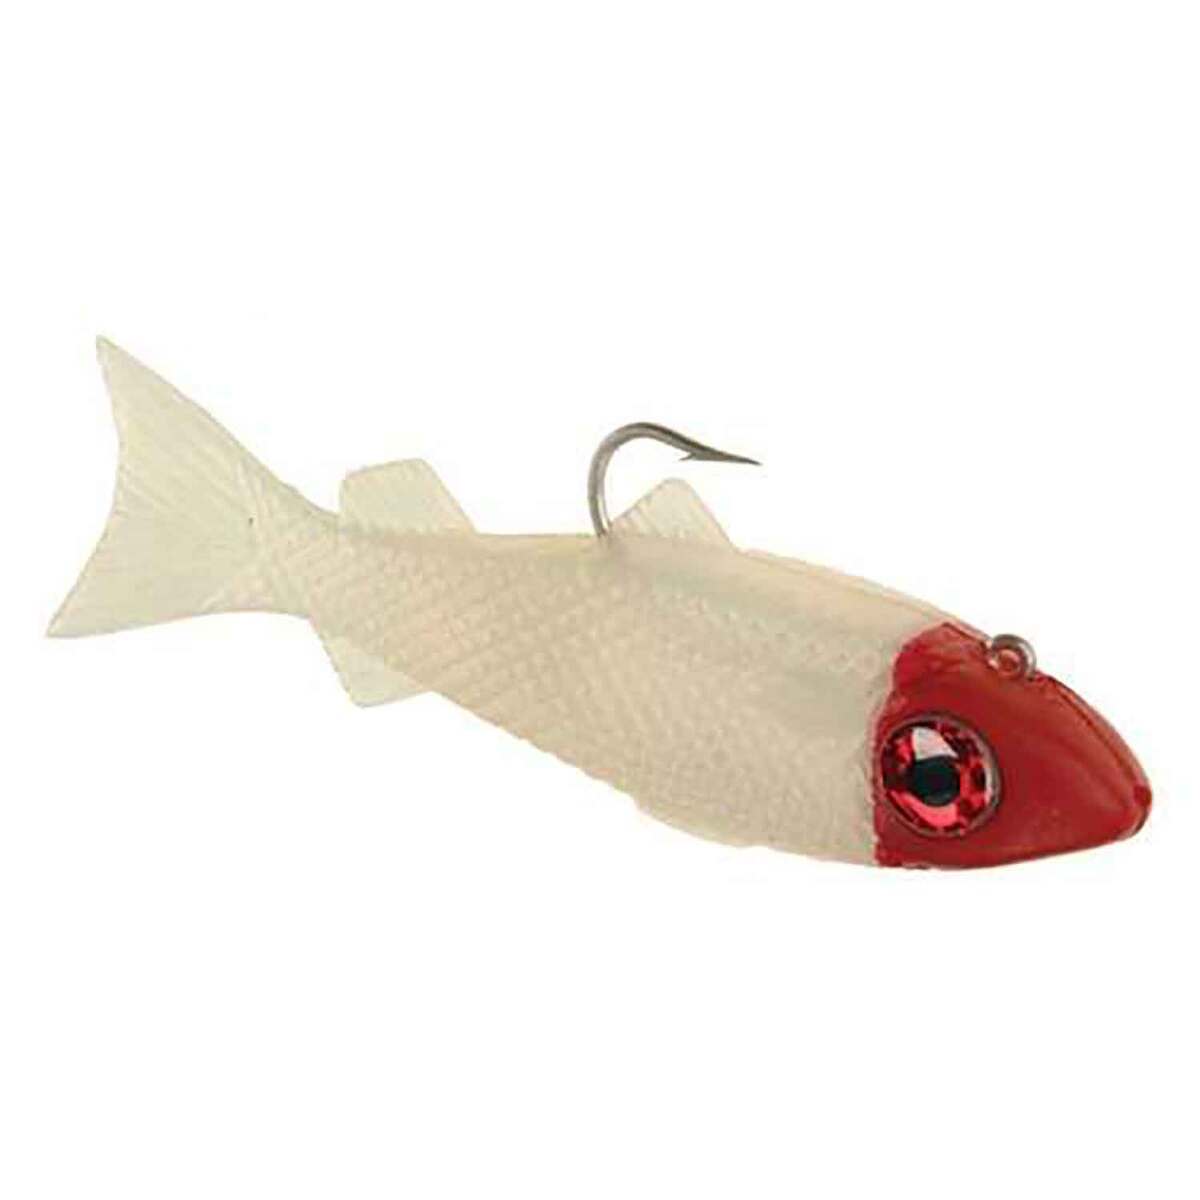 DOA SM-310 Swimming Mullet Lure, Pearl/Red Head